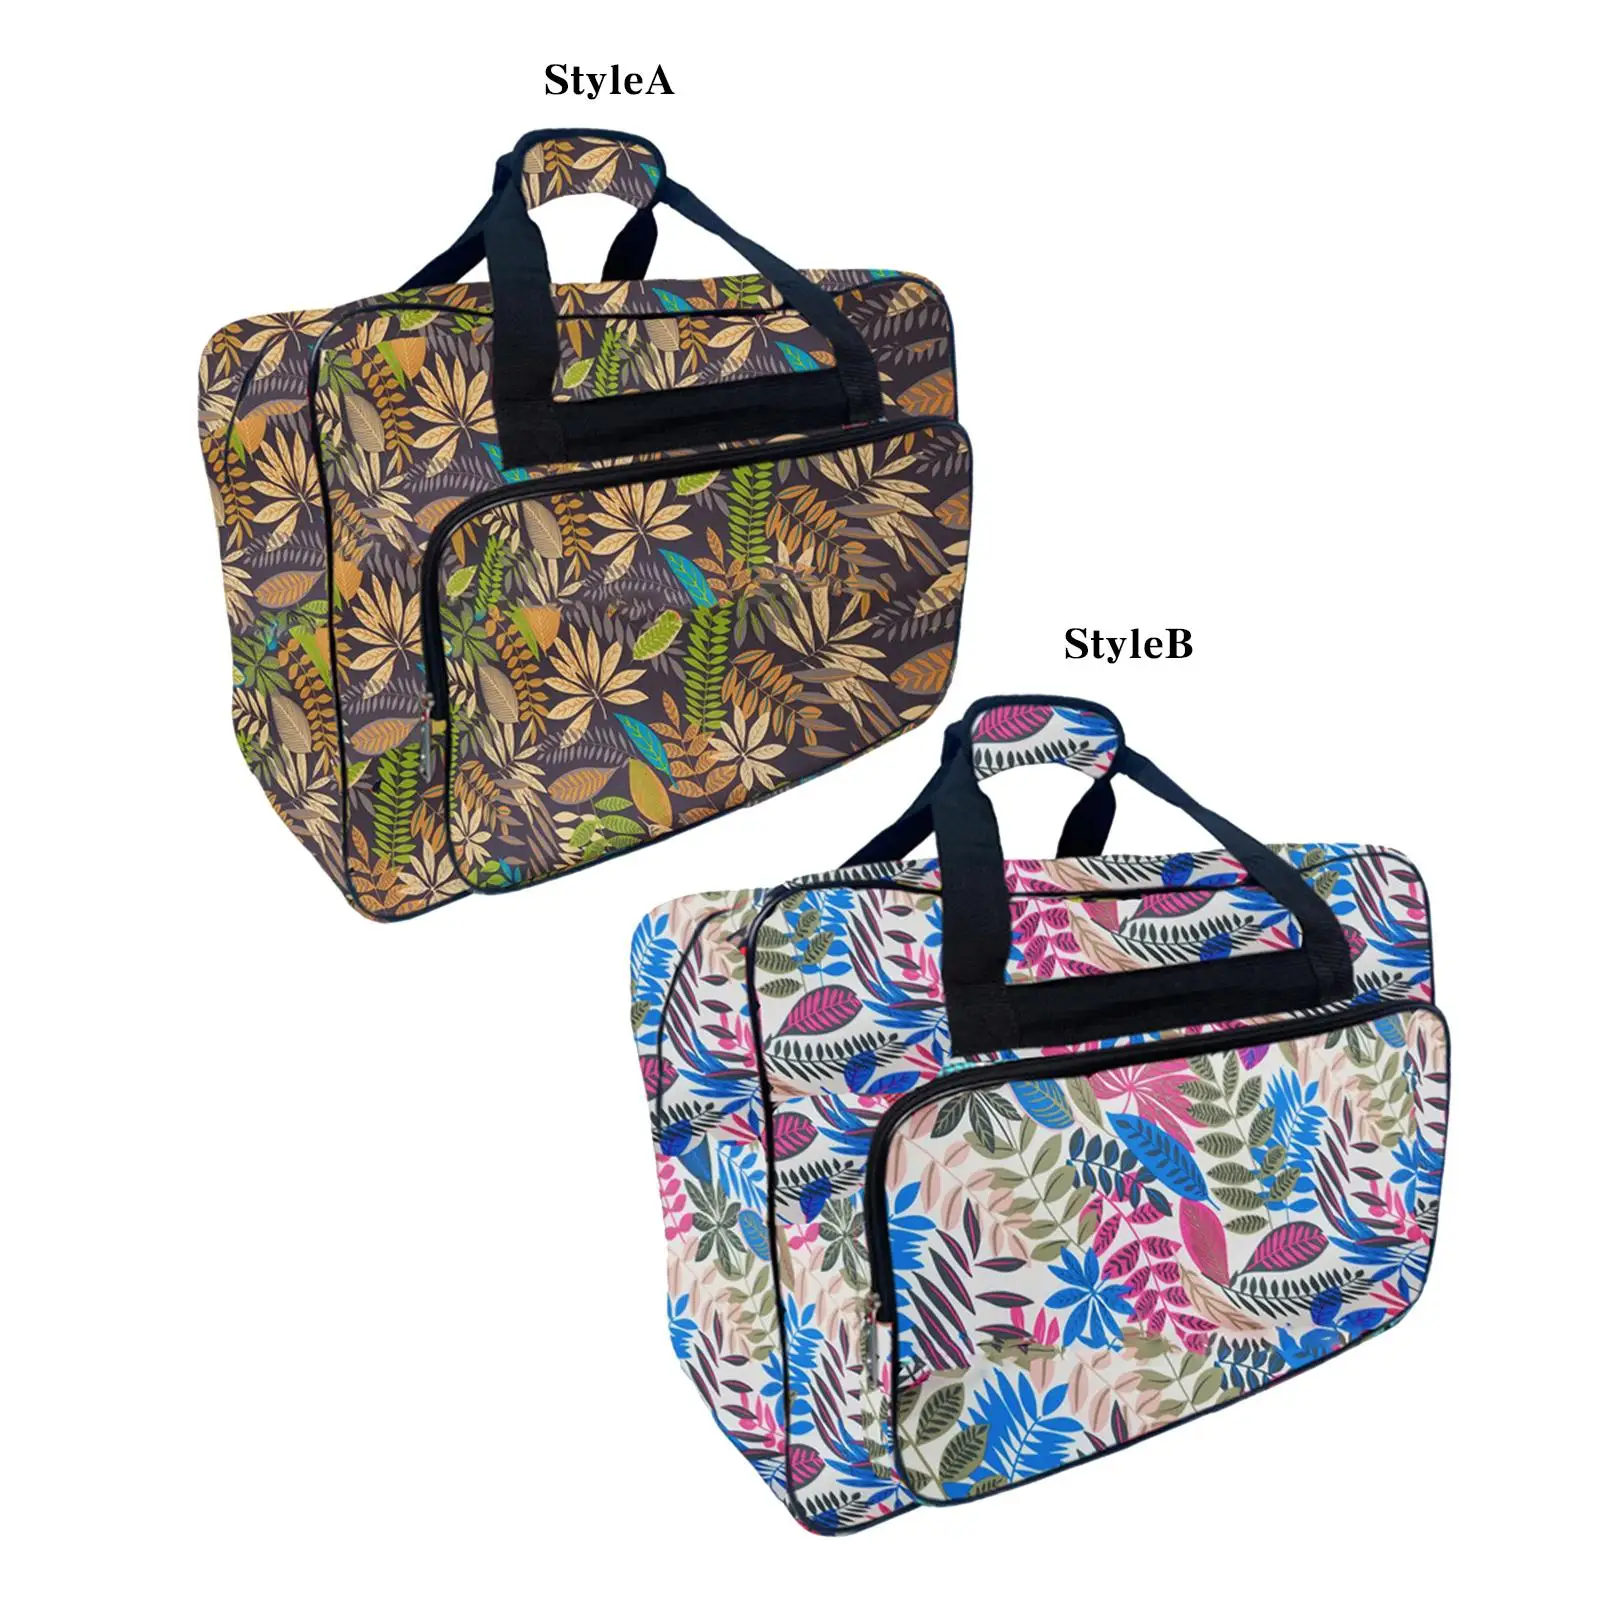 Universal Sewing Machine bag Pockets with Pockets with Padding Pad Handbag Tote Carrier for Standard Sewer